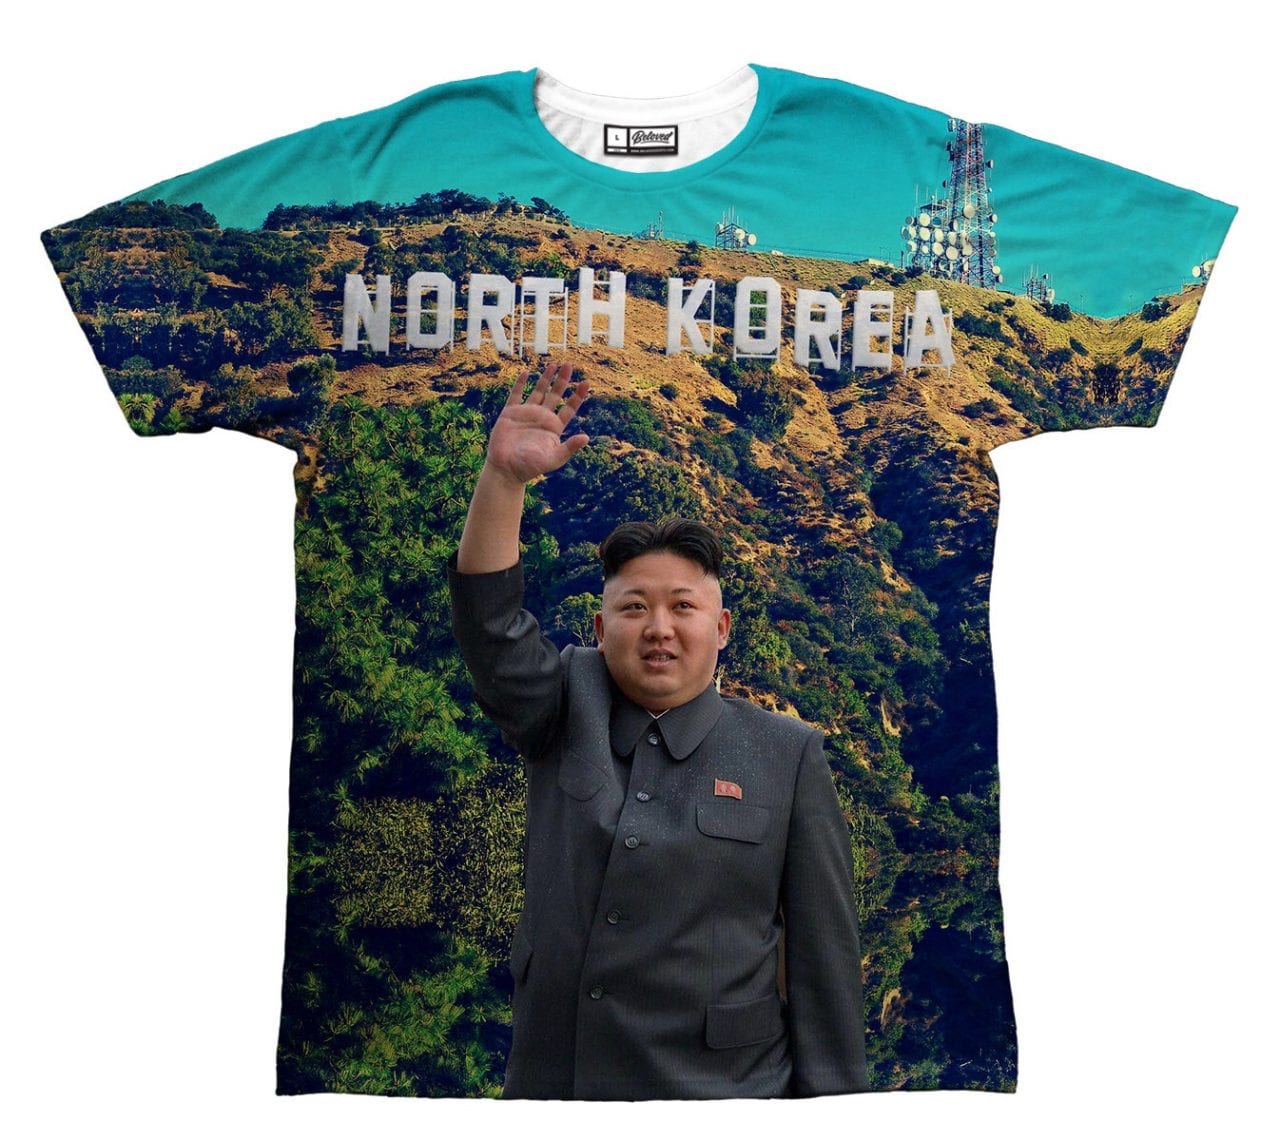 North Korea - This pretty much speaks for itself